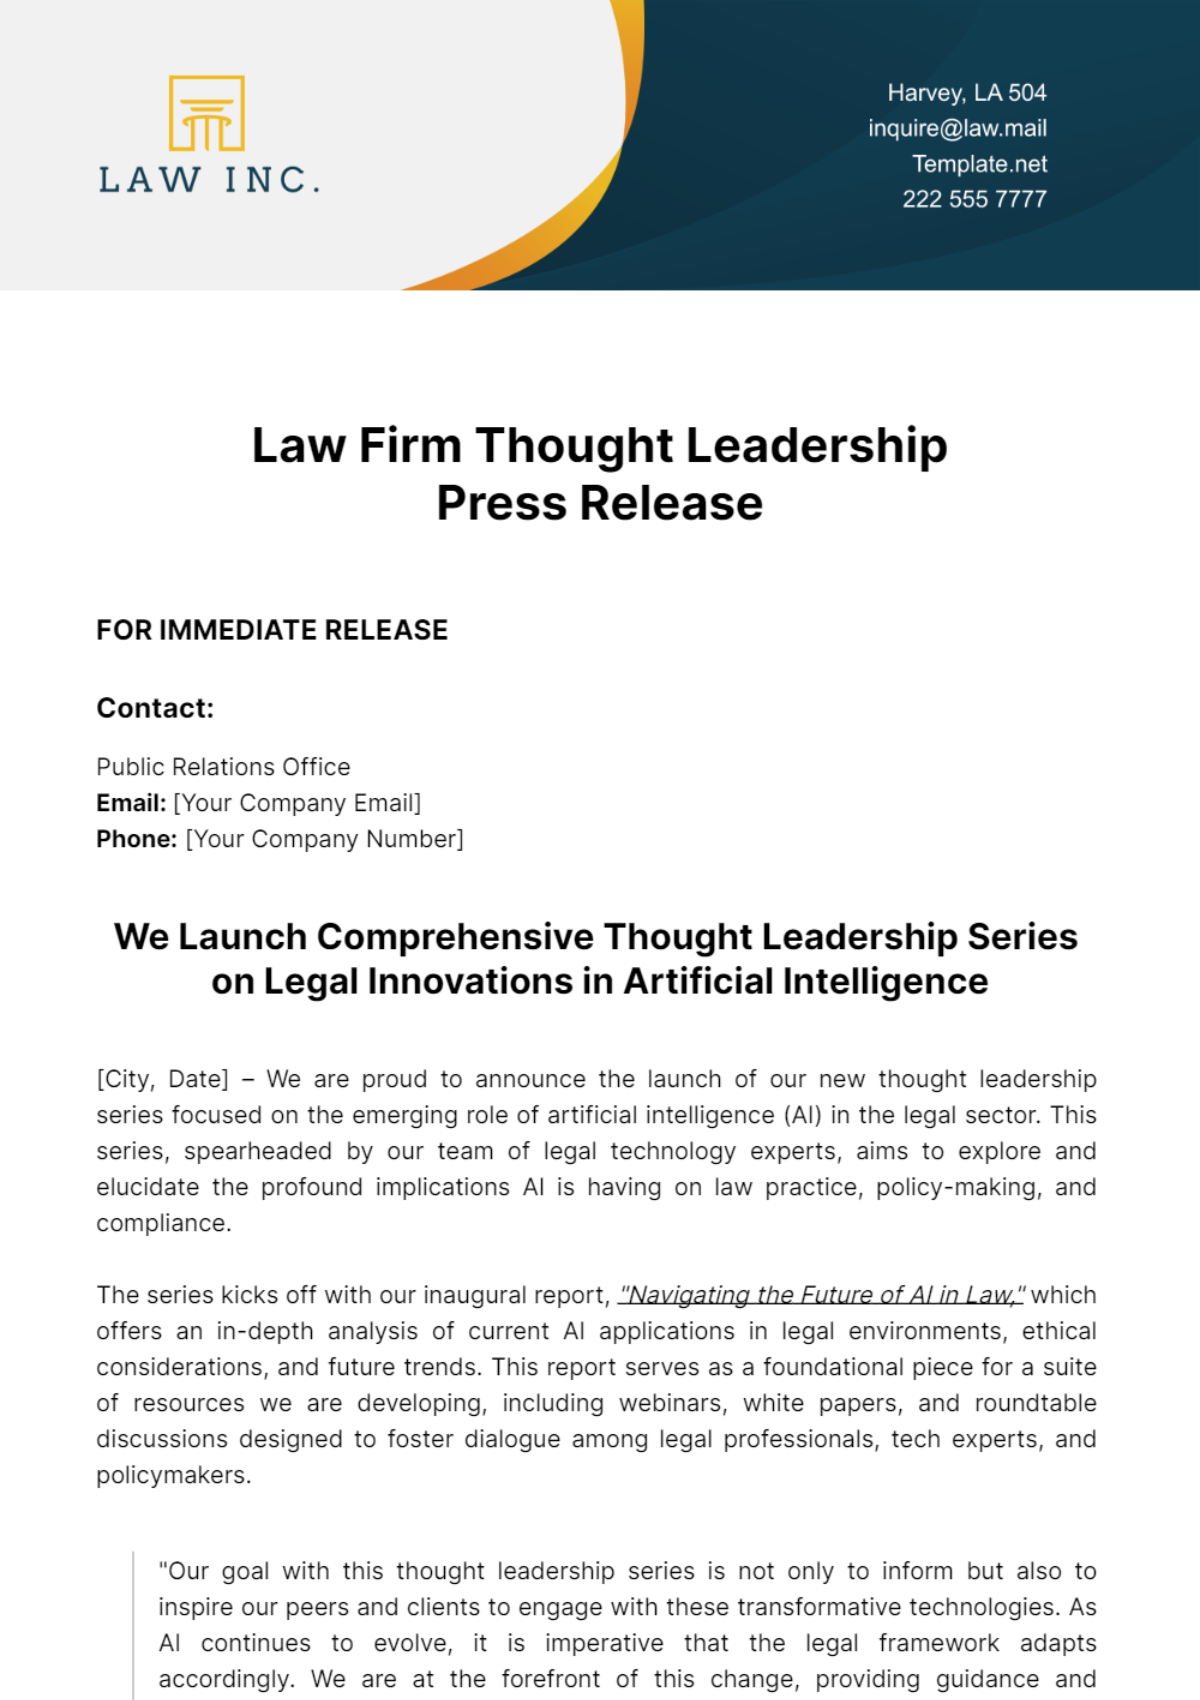 Law Firm Thought Leadership Press Release Template